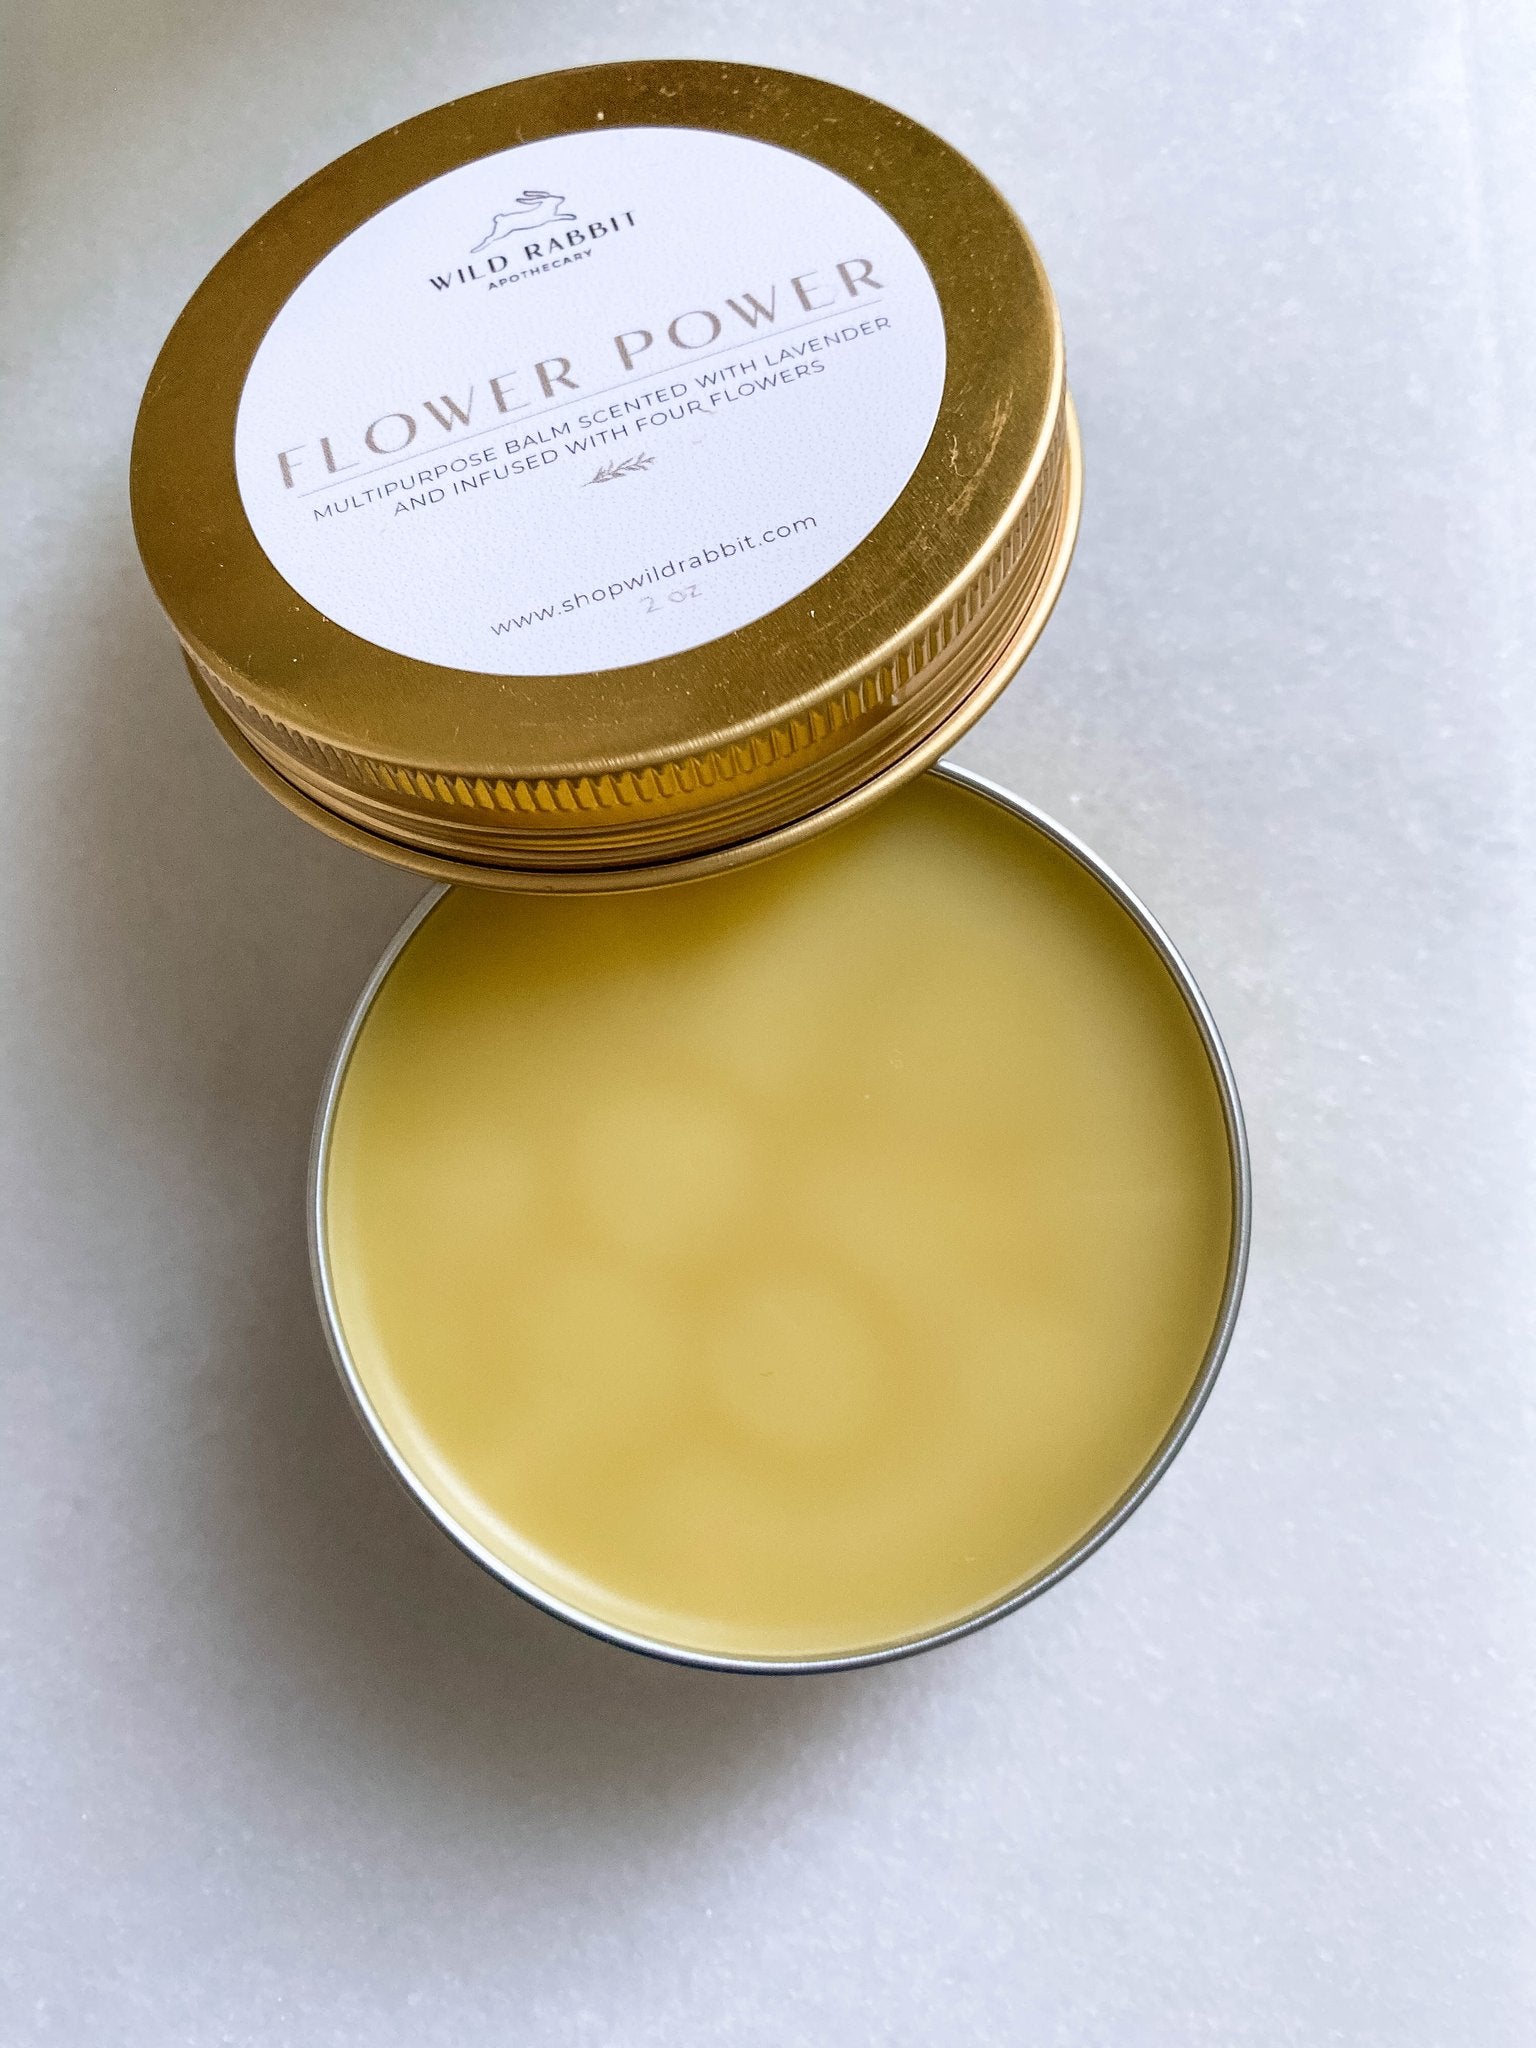 Wild Rabbit Flower Power Balm: Multipurpose Herbal Balm Scented with Lavender and Infused with Flowers